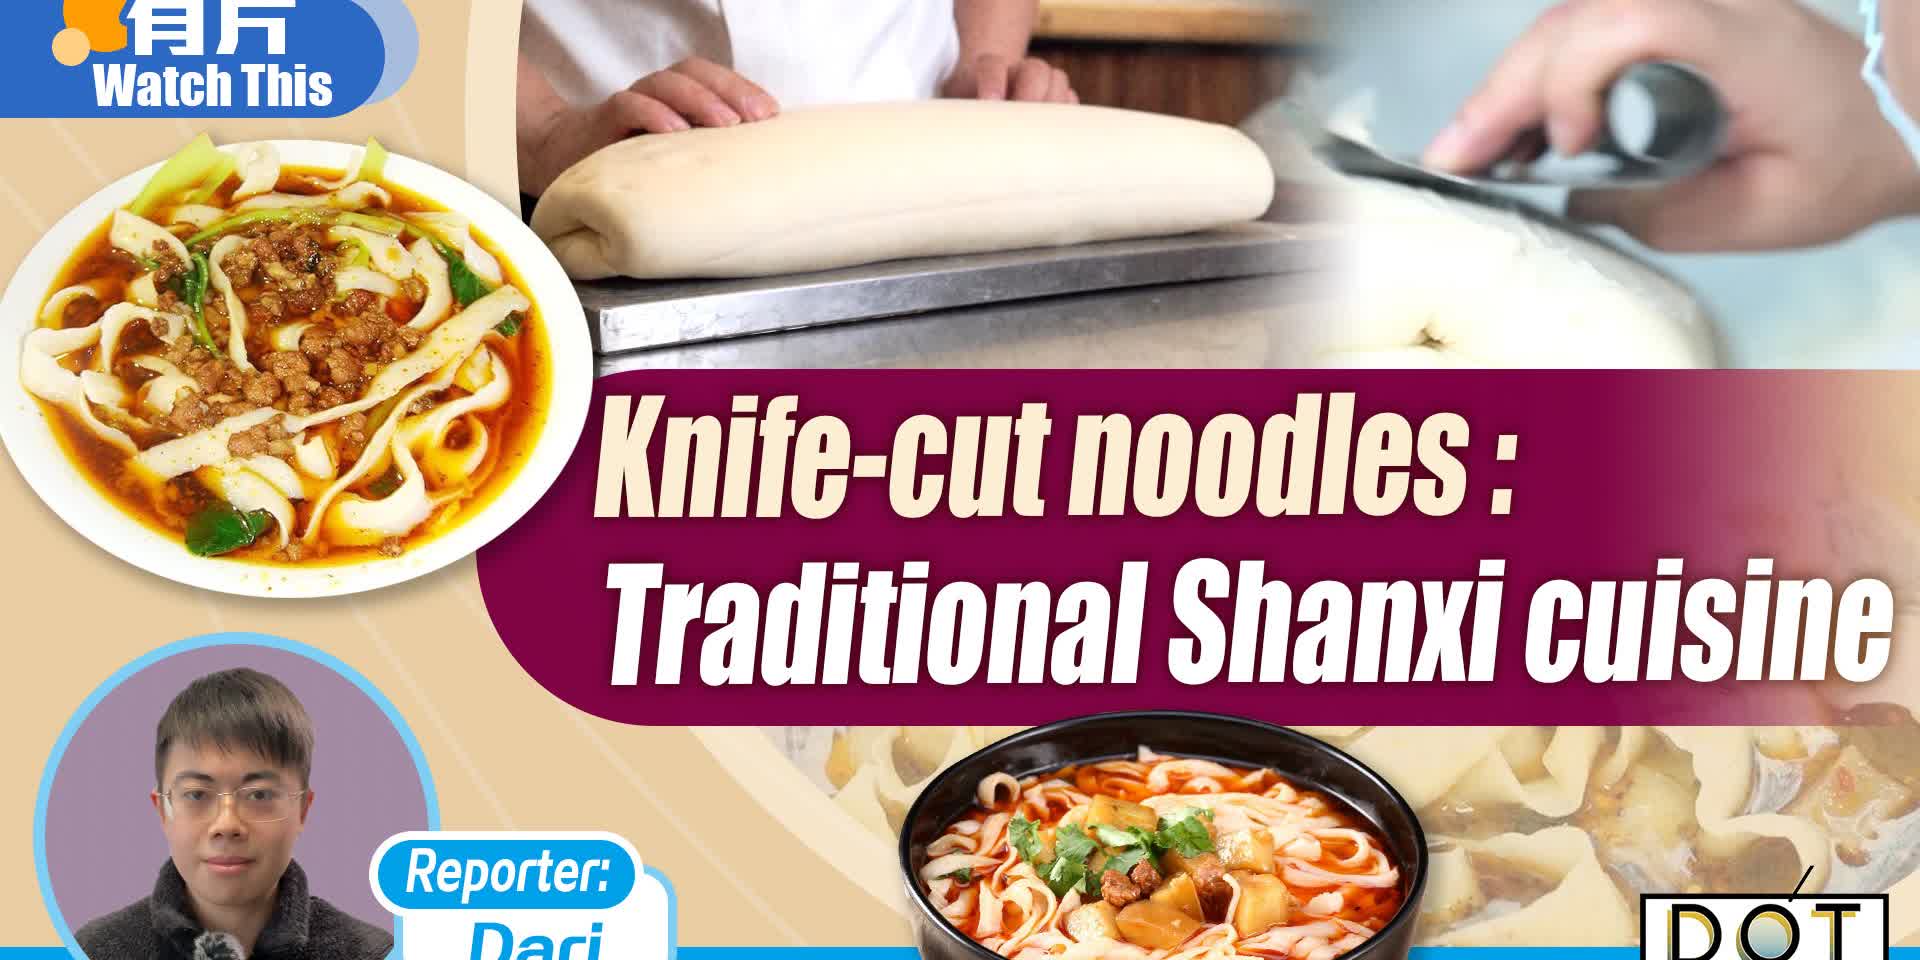 Watch This | Knife-cut noodles: Traditional Shanxi cuisine